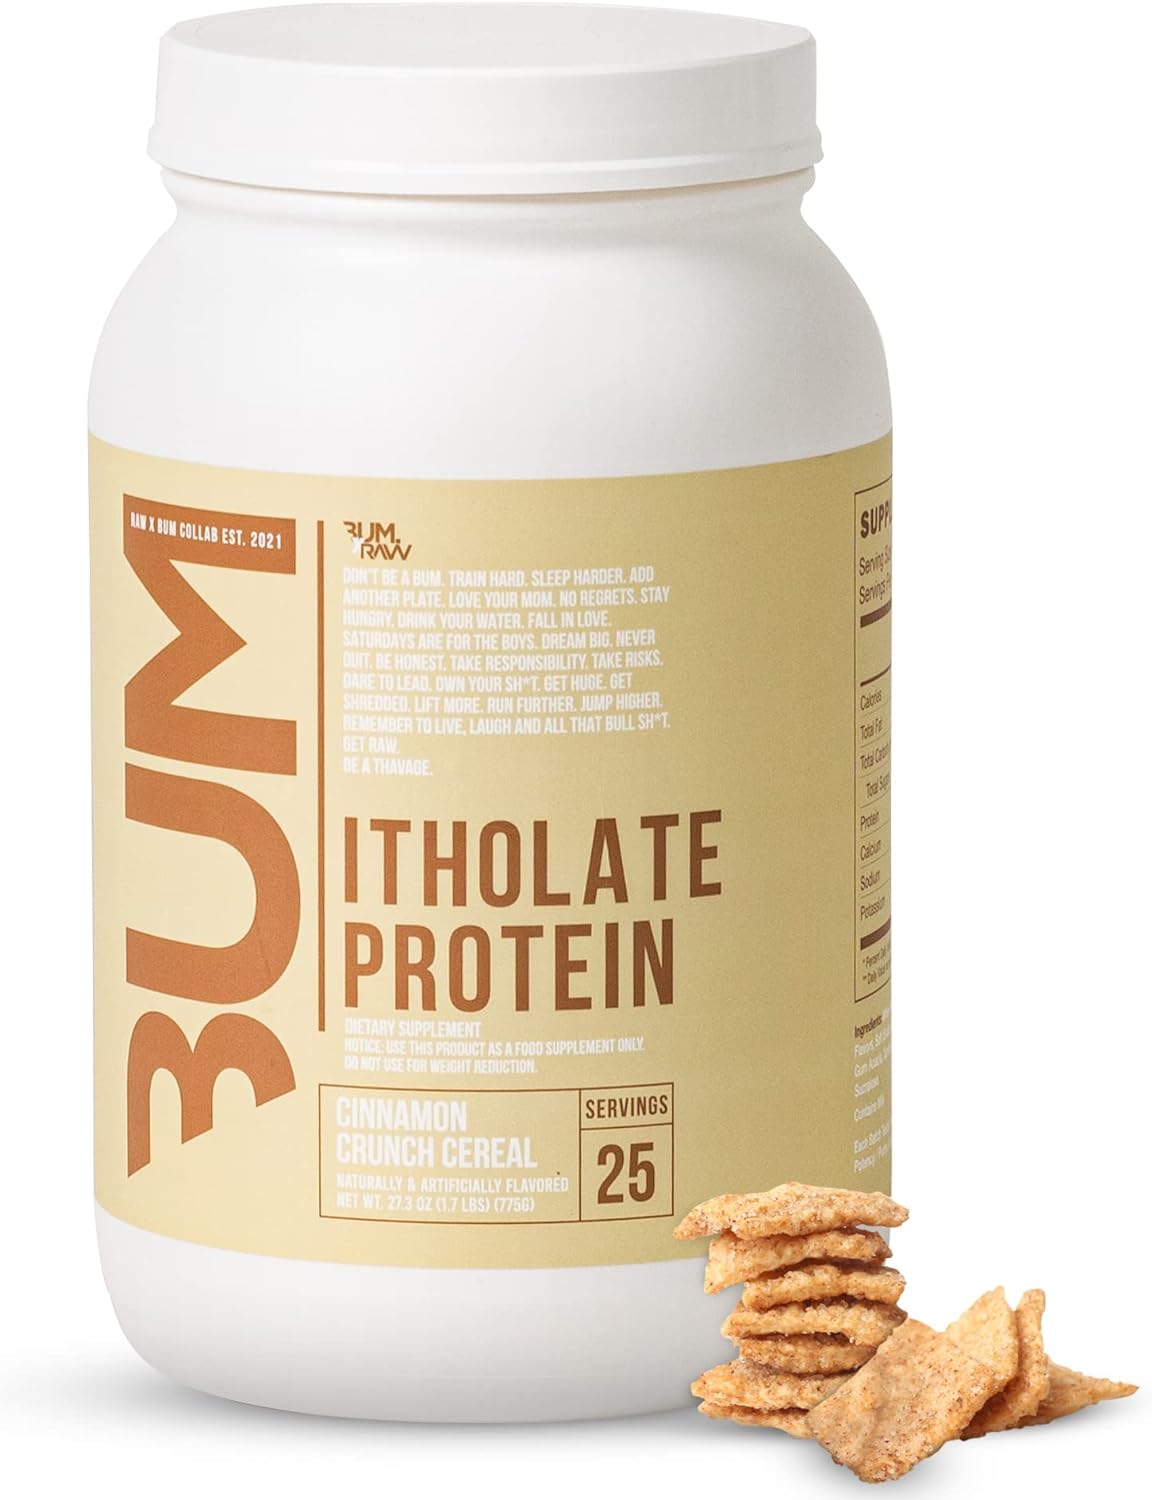 RAW Whey Isolate Protein Powder, Cinnamon Crunch (CBUM Itholate Protein) - 100% Grass-Fed Sports Nutrition Powder for Muscle Growth & Recovery - Low-Fat, Low Carb, Naturally Flavored - 25 Servings